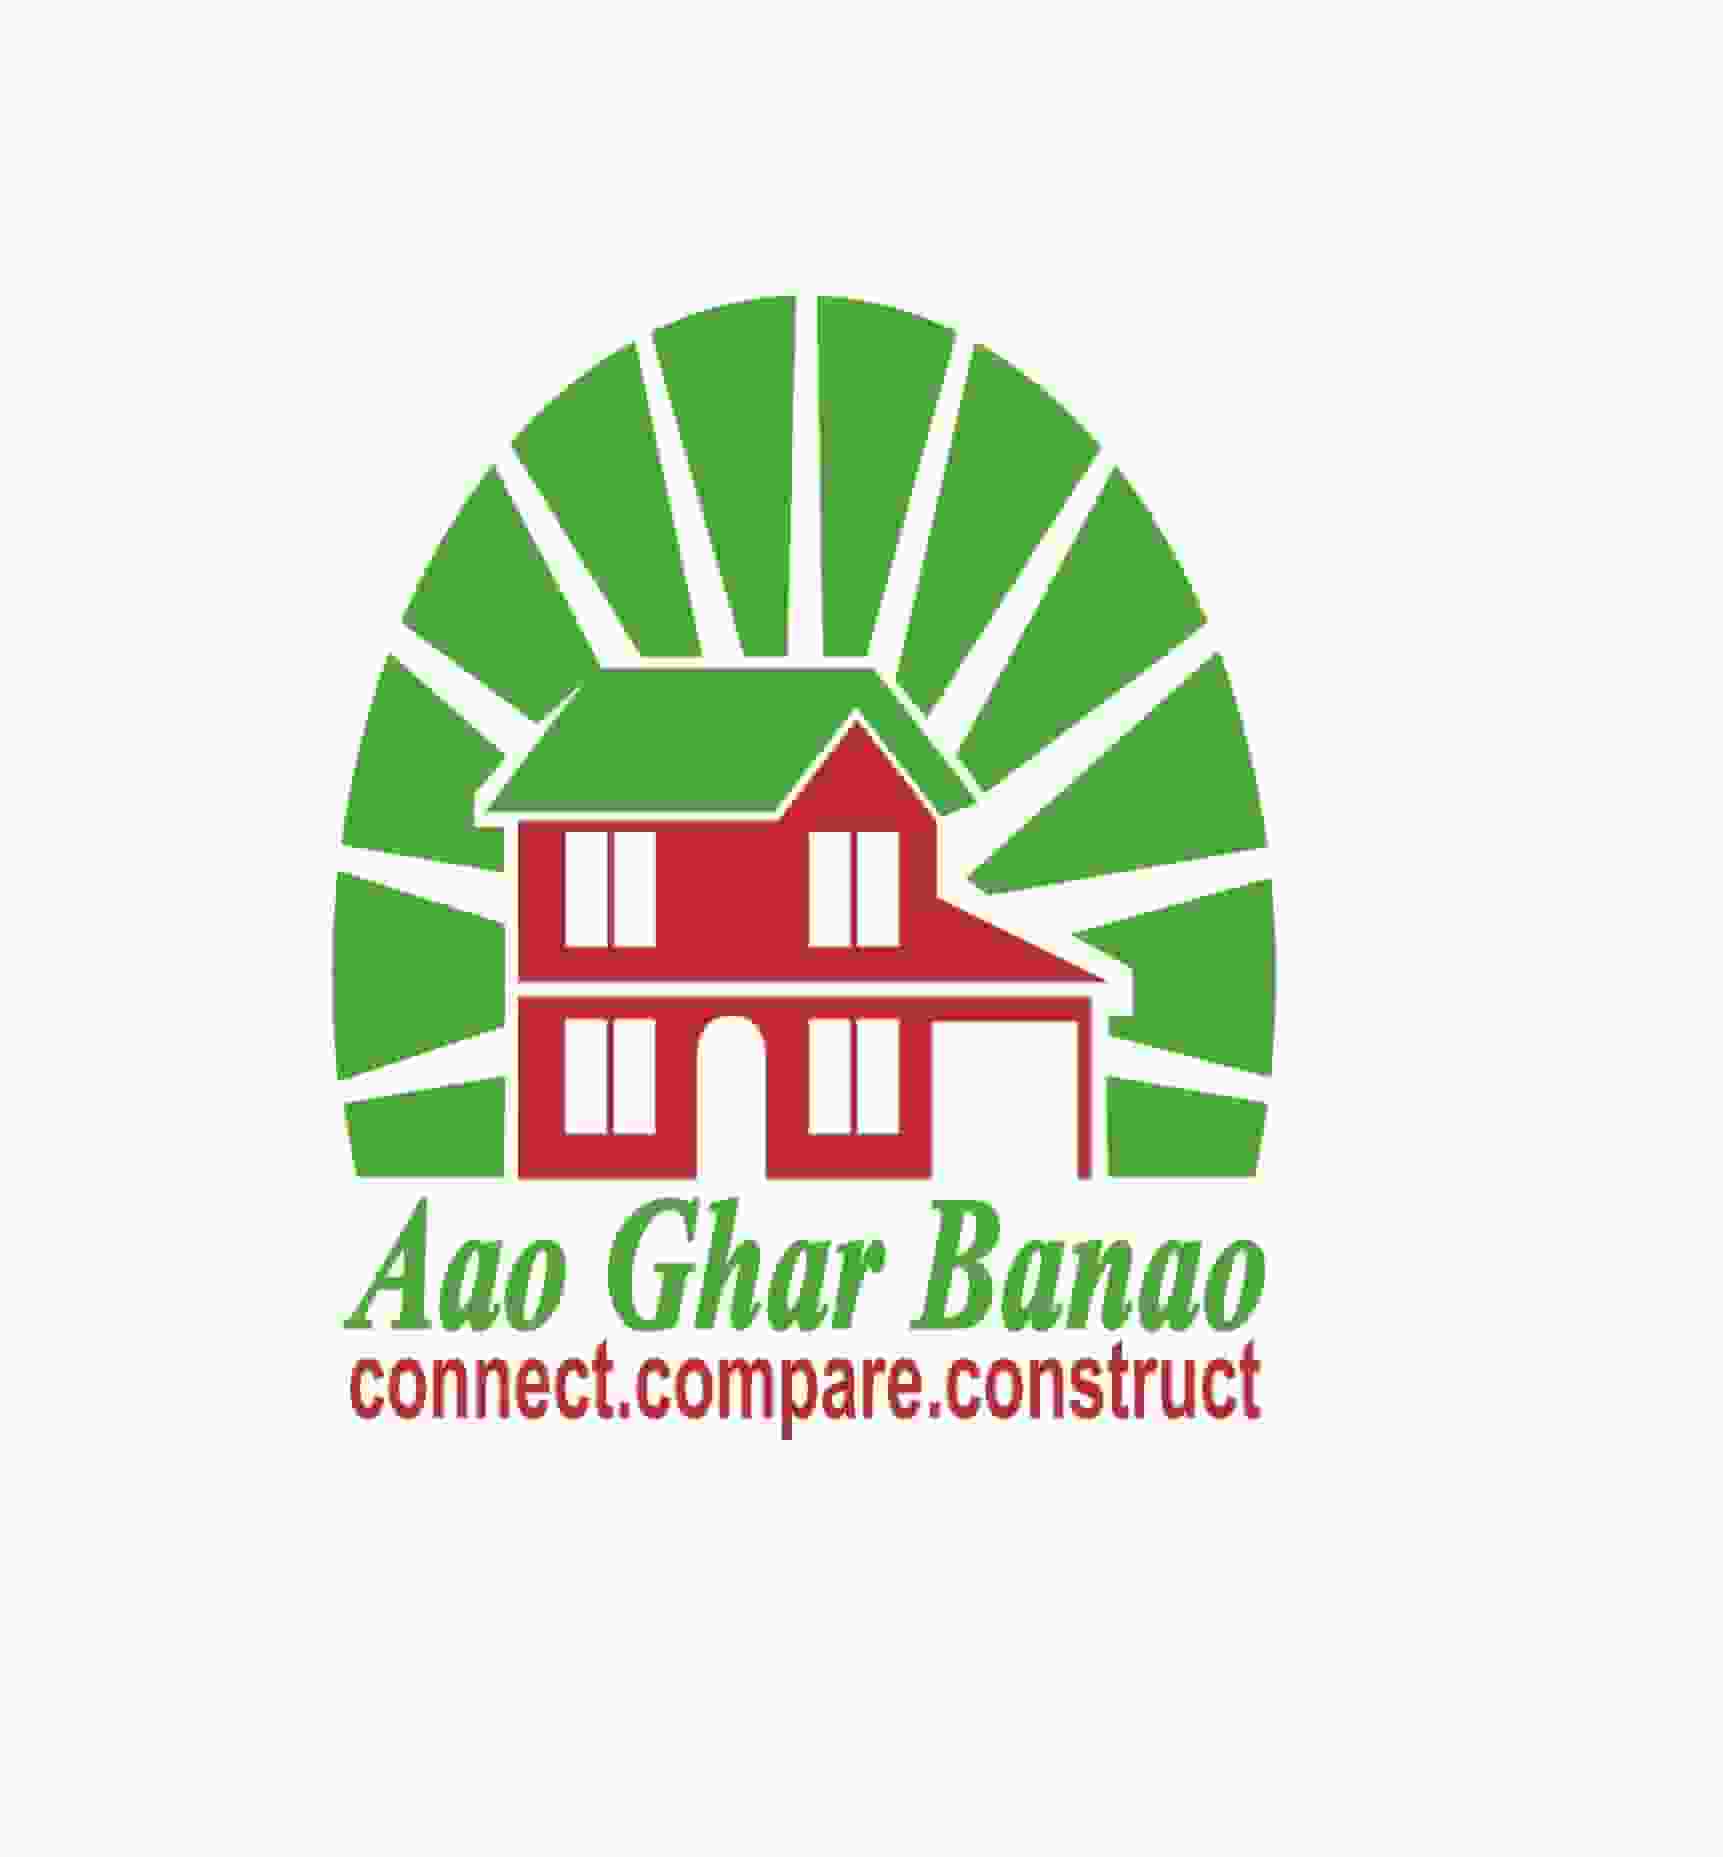 Cement, Cement Suppliers/dealers in Faridabad | Aao Ghar Banao